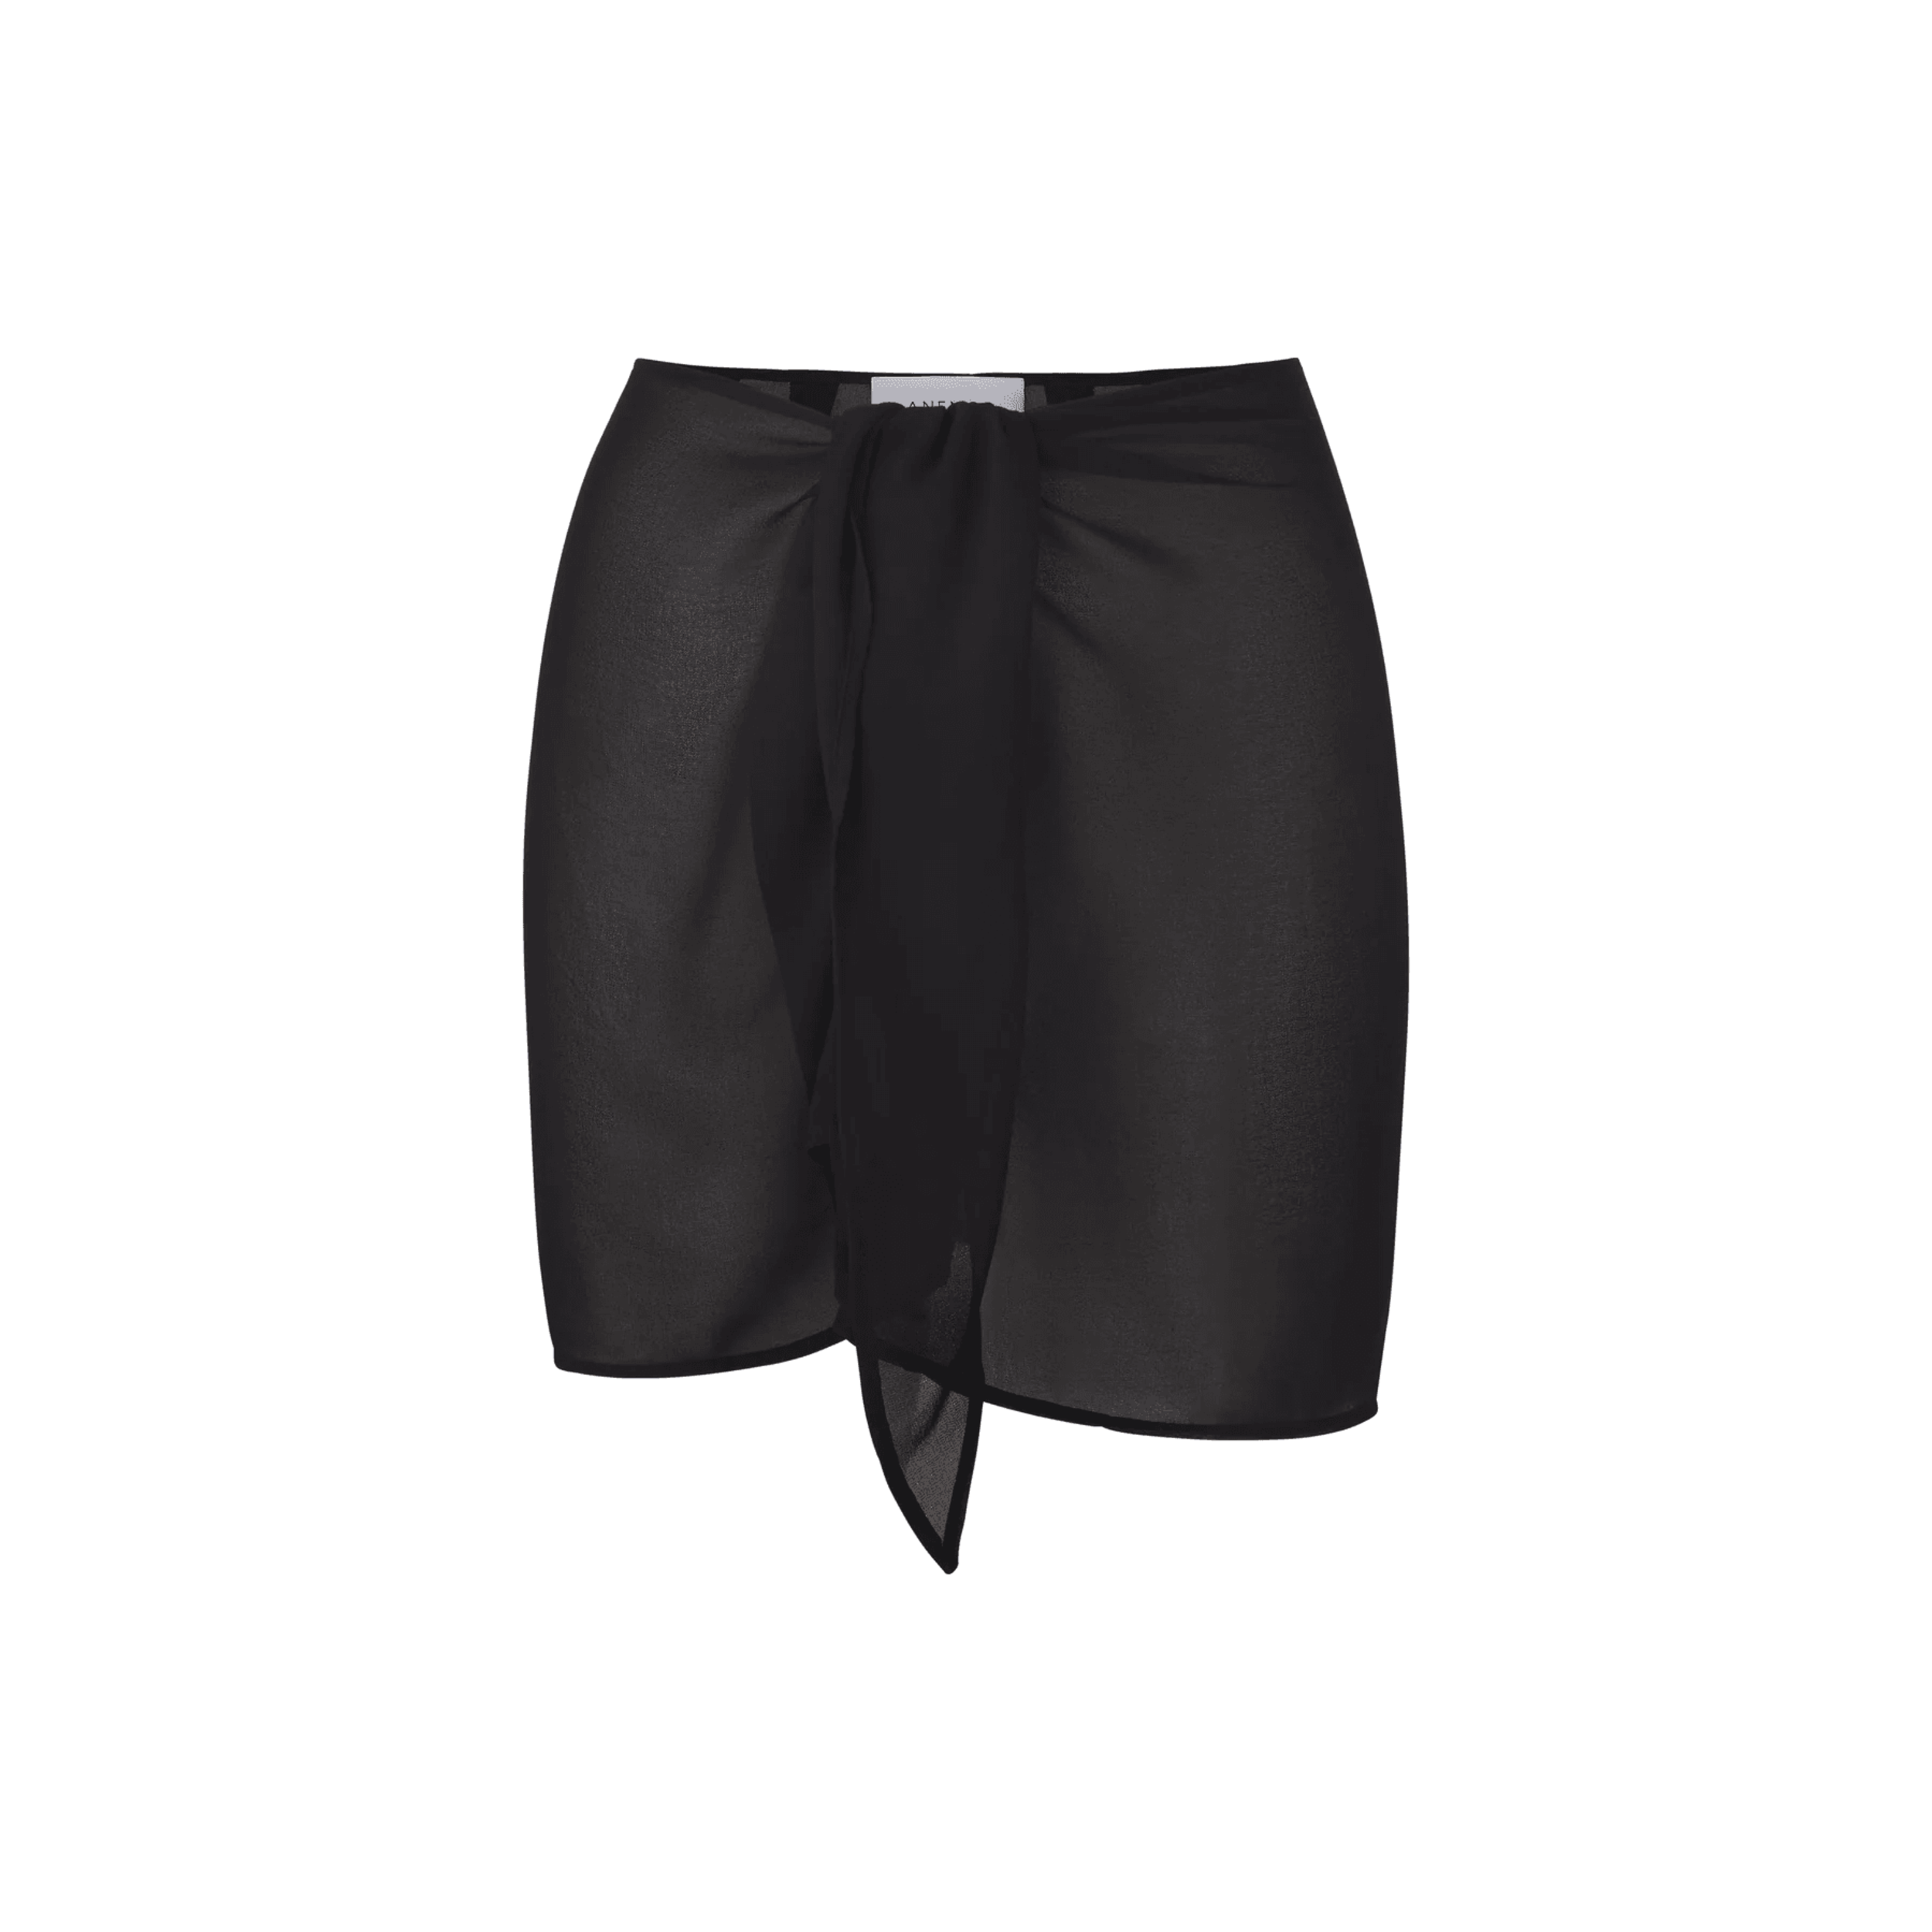 Anemos - The Wrap Mini Skirt Cover Up